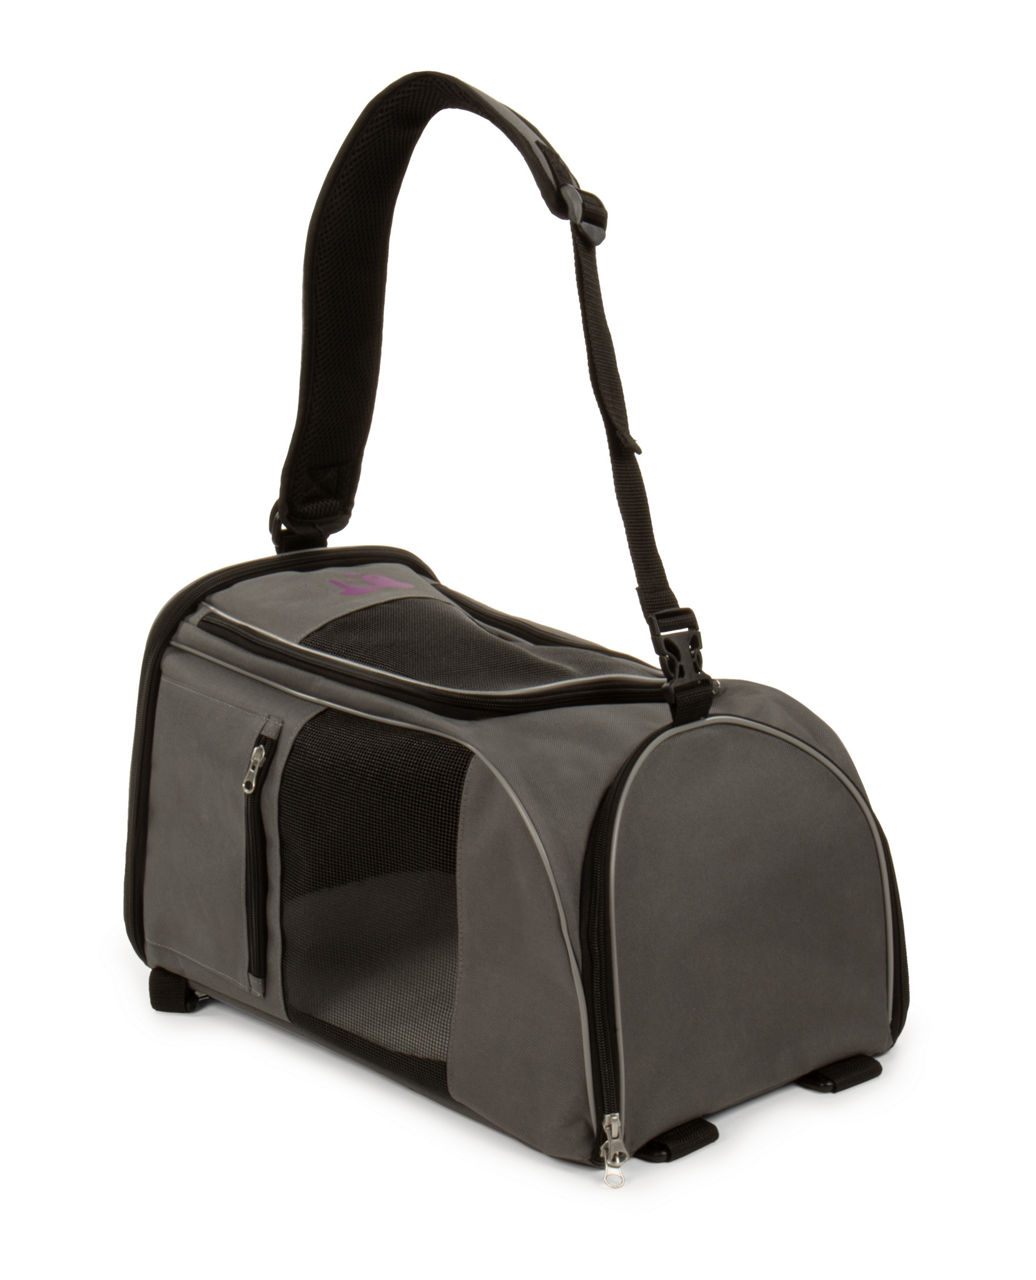 Pups & Bubs Let's Adventure Pet Carrier Front & Backpack (2 Ways) for Dogs, Puppy & Cats (Black)